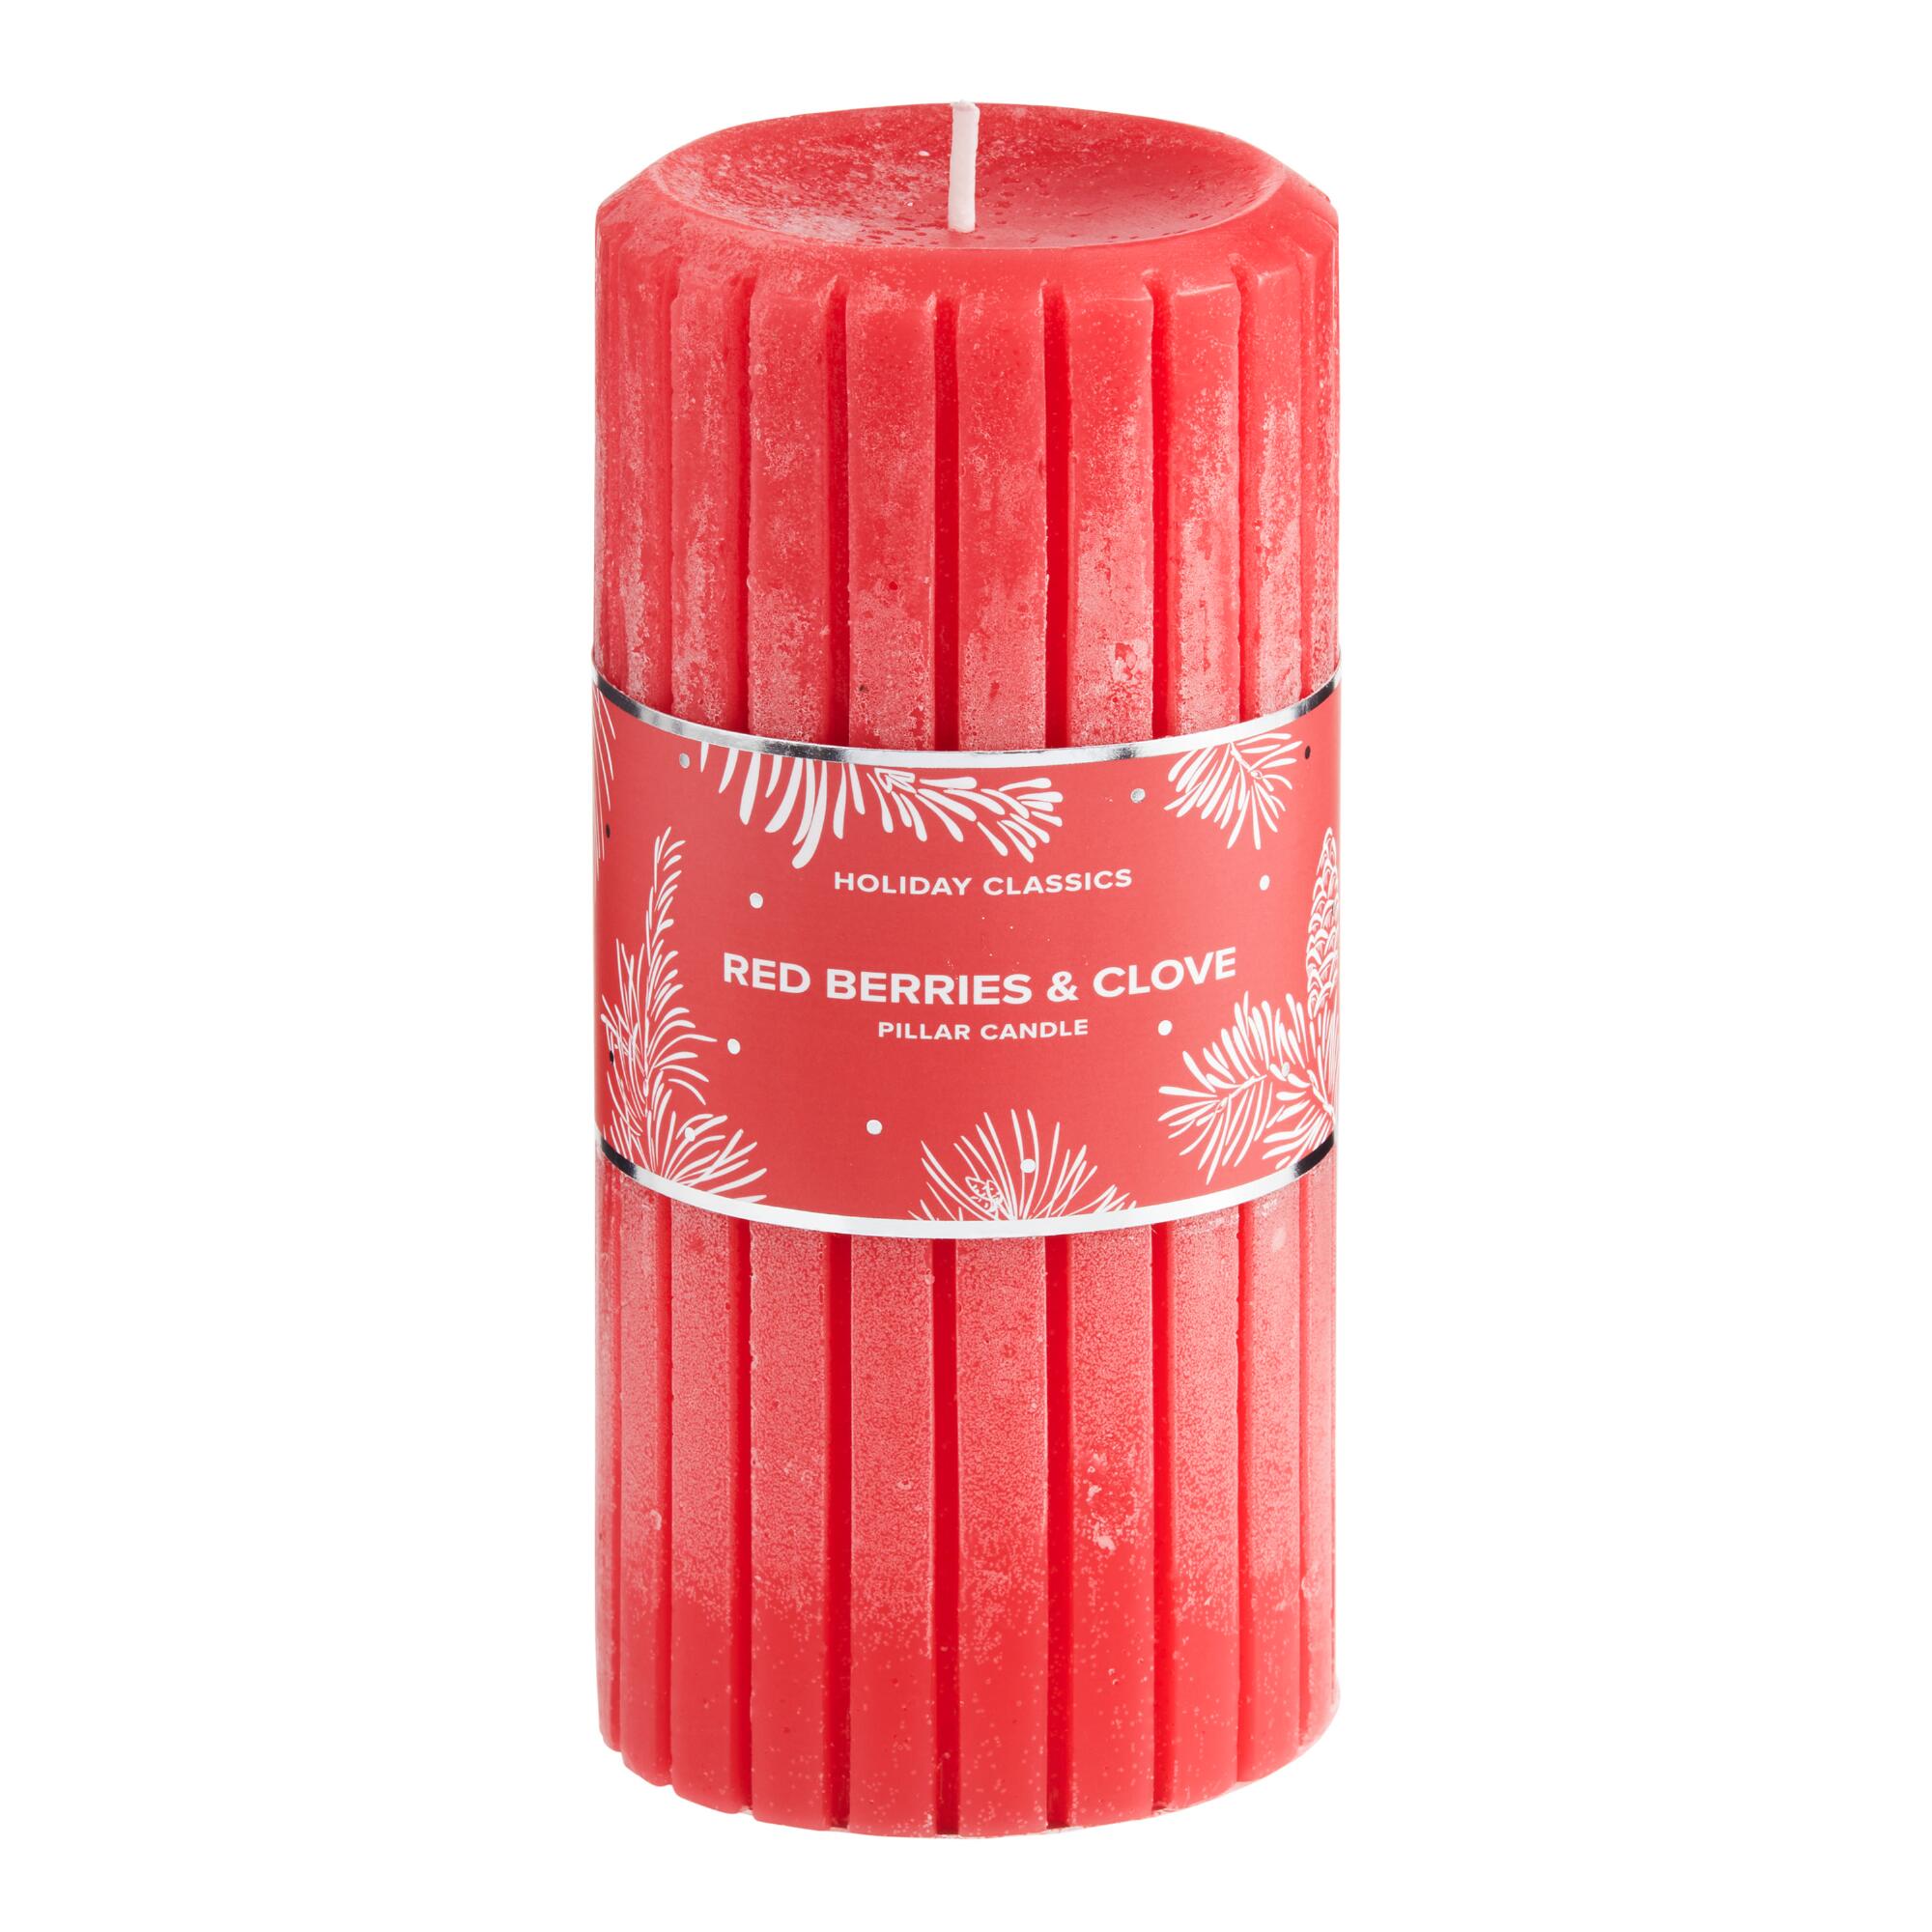 6 Inch Red Berries and Clove Pillar Candle - Scented Wax by World Market